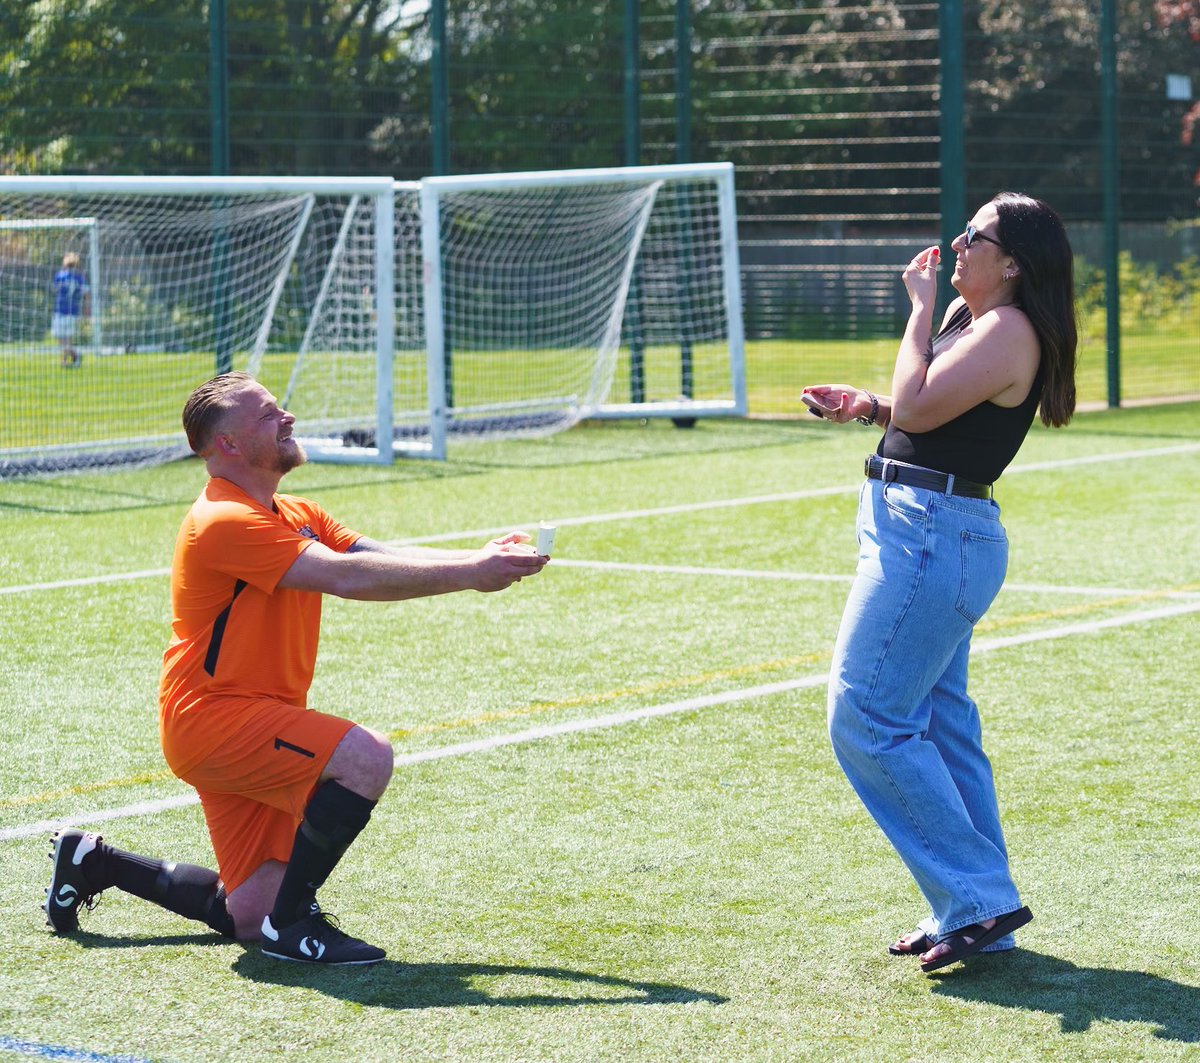 💍 Didn't expect a marriage proposal covering today's charity match! #proposal #marriage #shesaidyes #diamondring